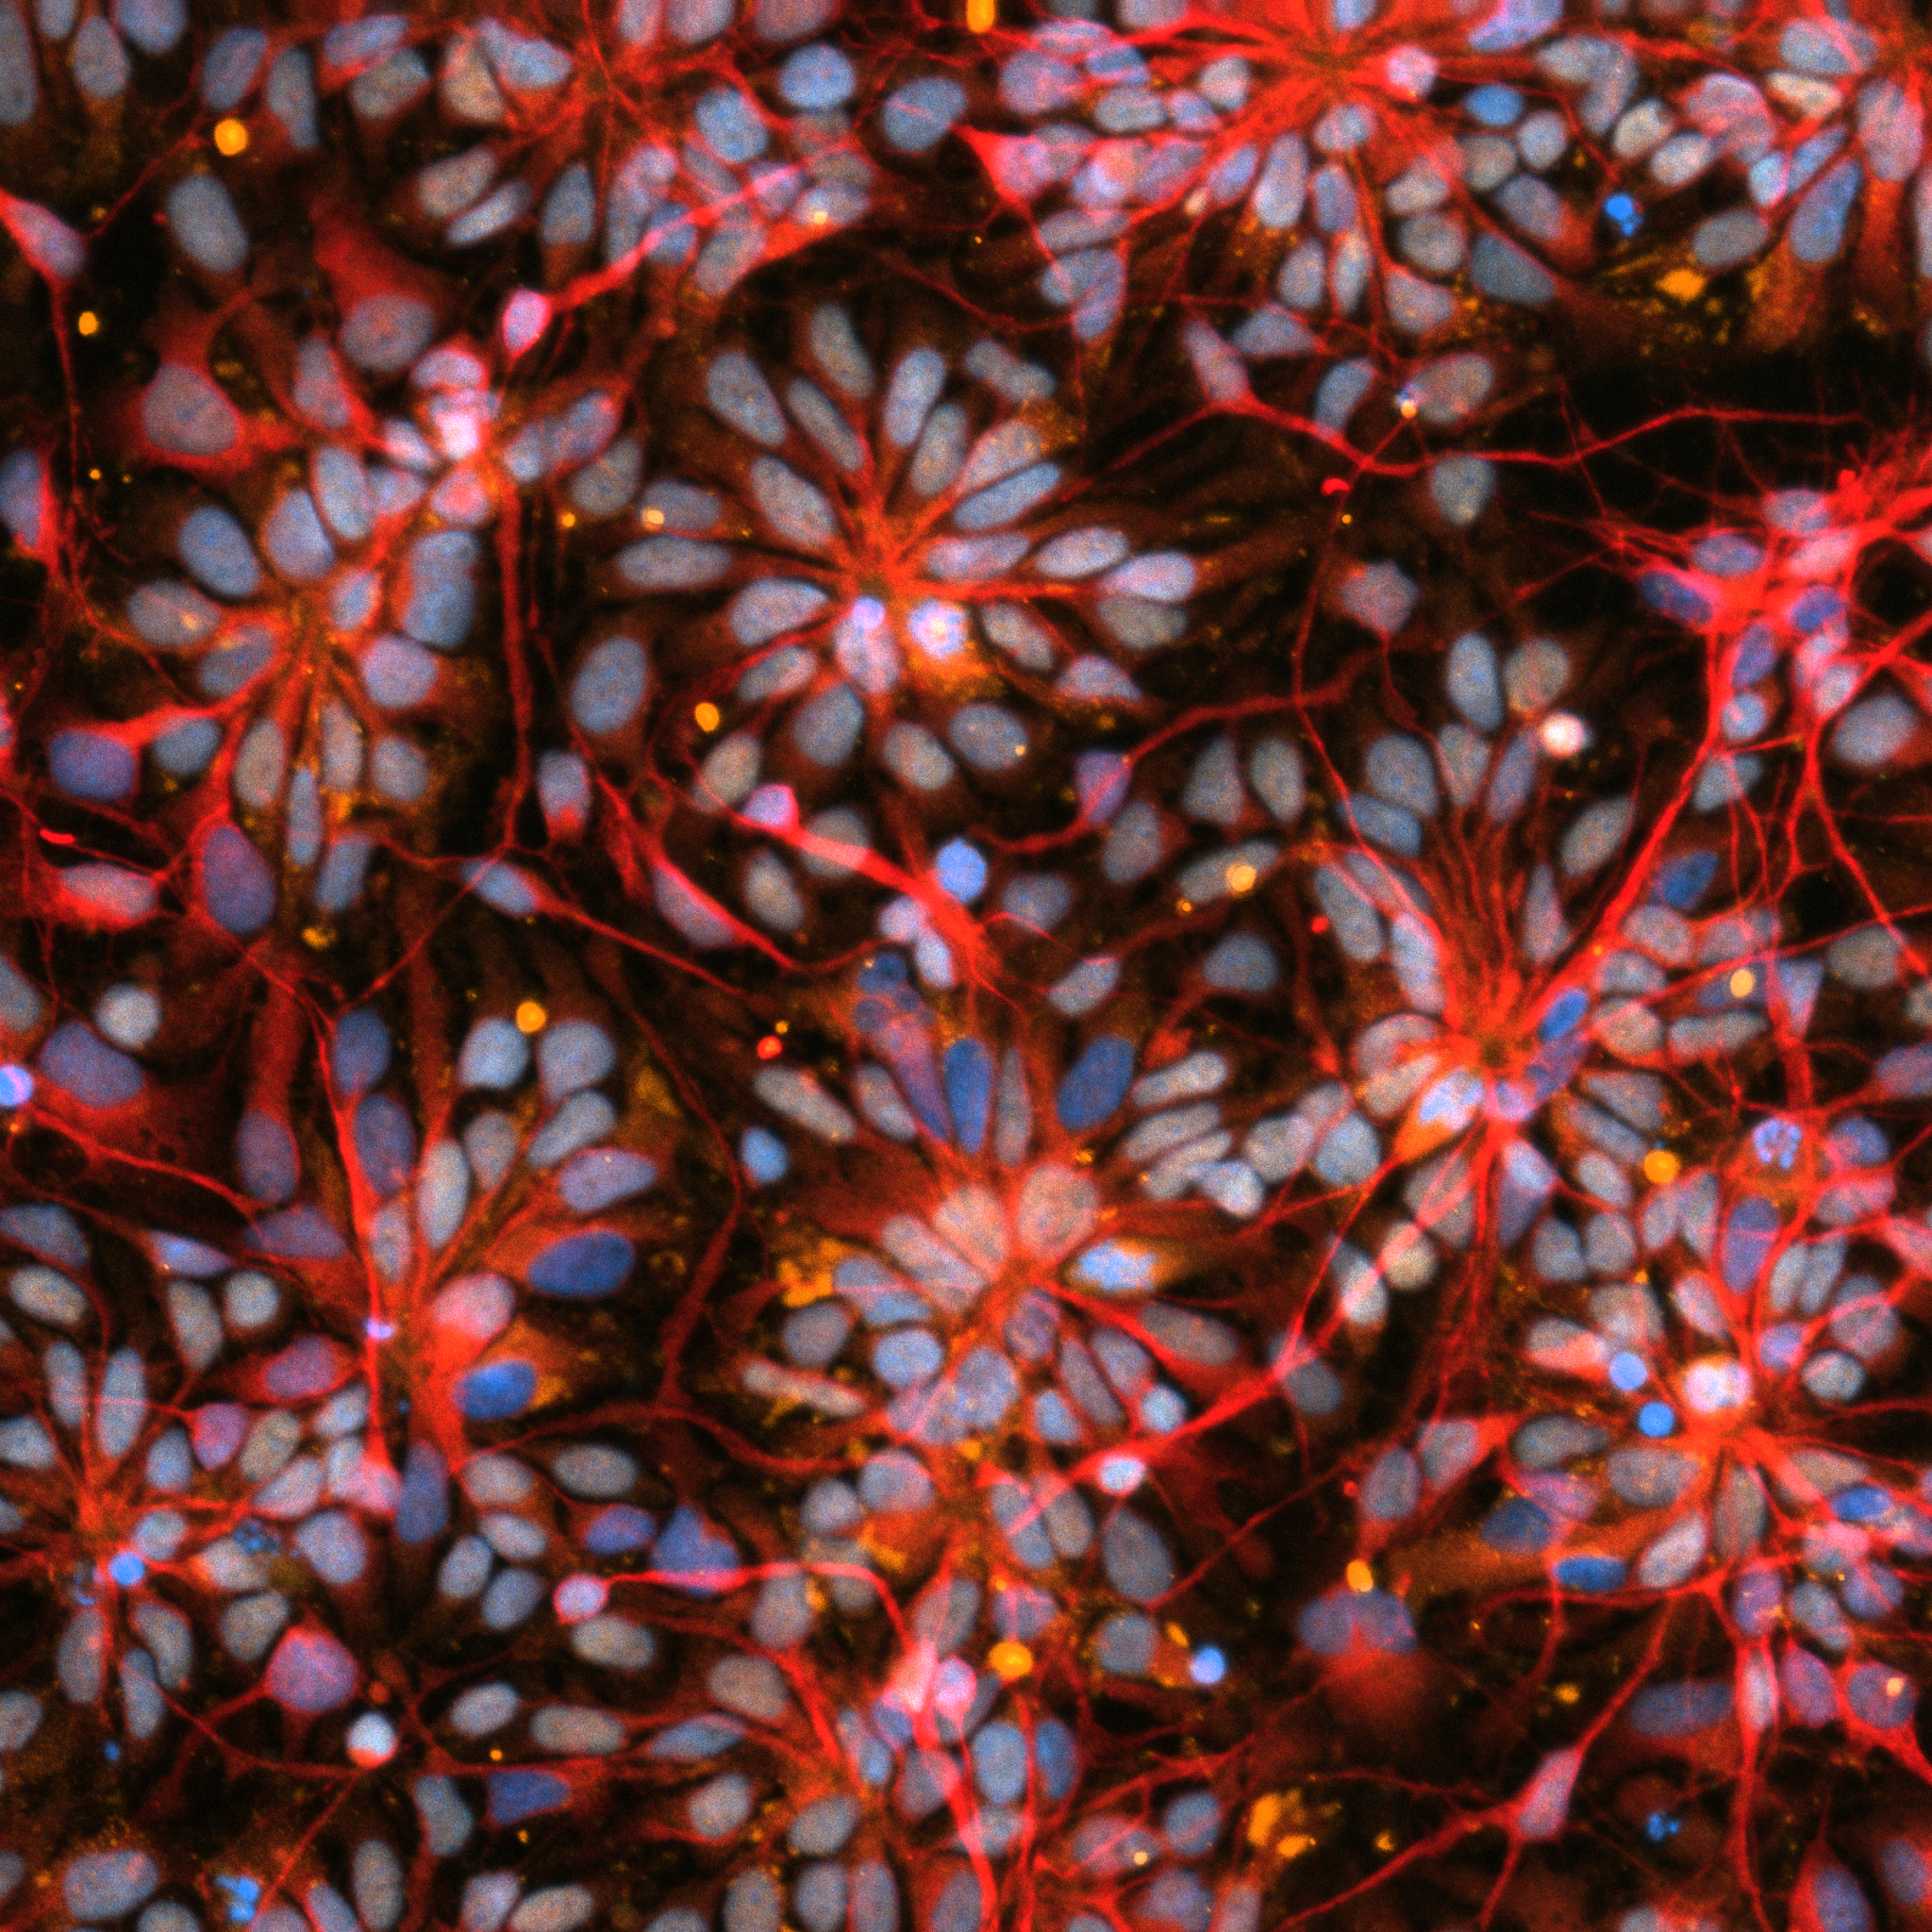 The image is covered by flower-like clusters of pale white and blue cells connected by reddish nerves.